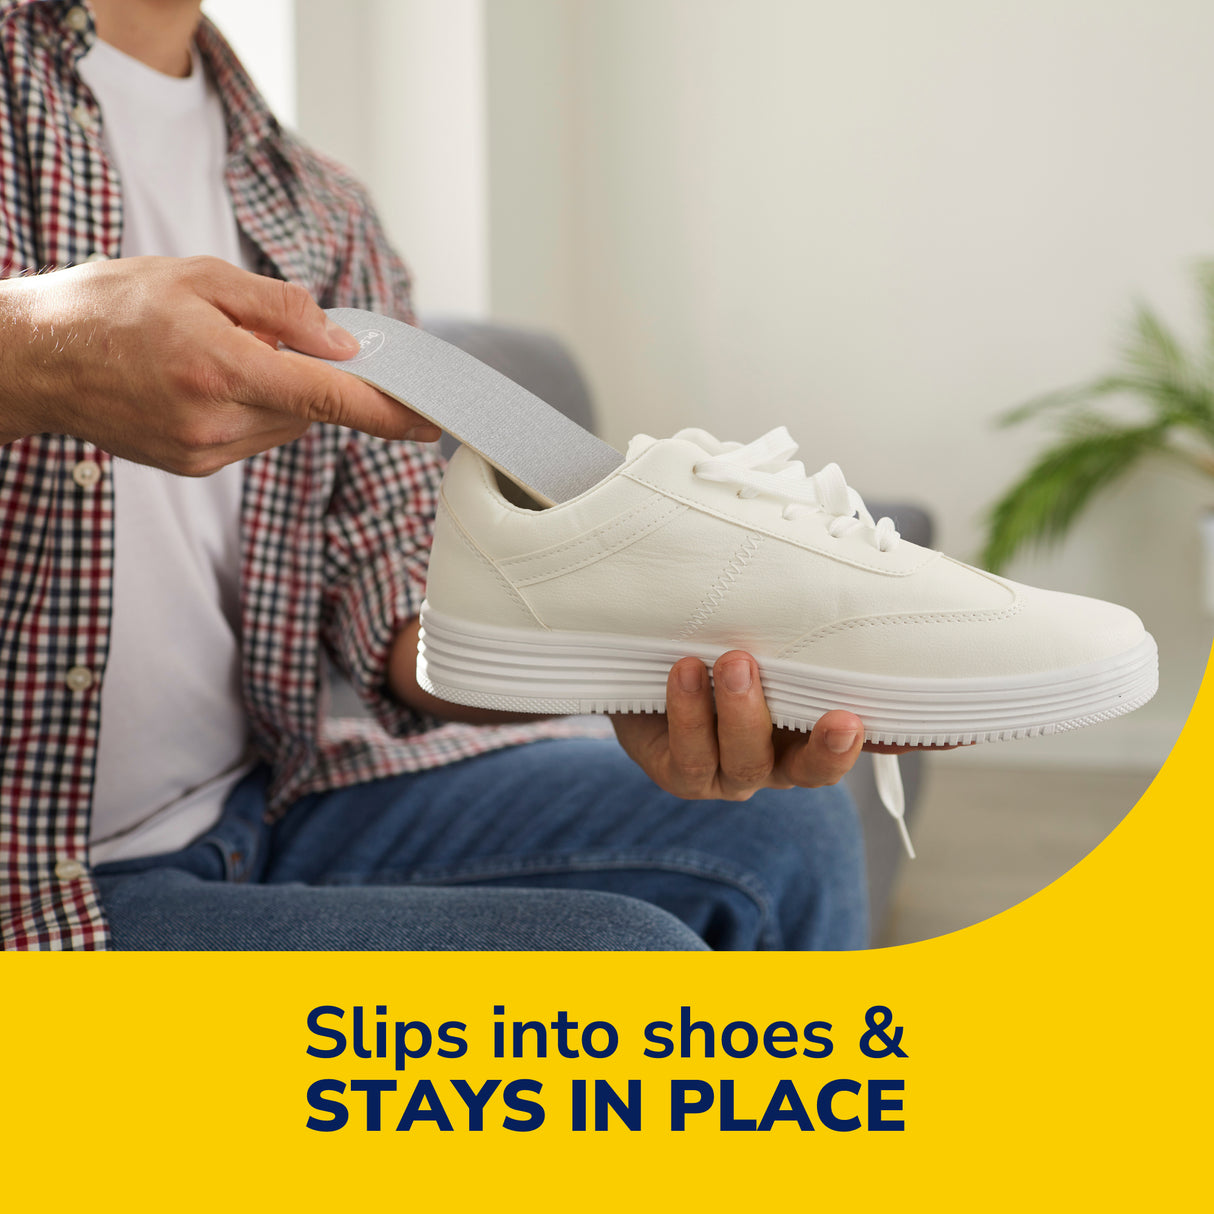 image of slips into shoes and stays in place